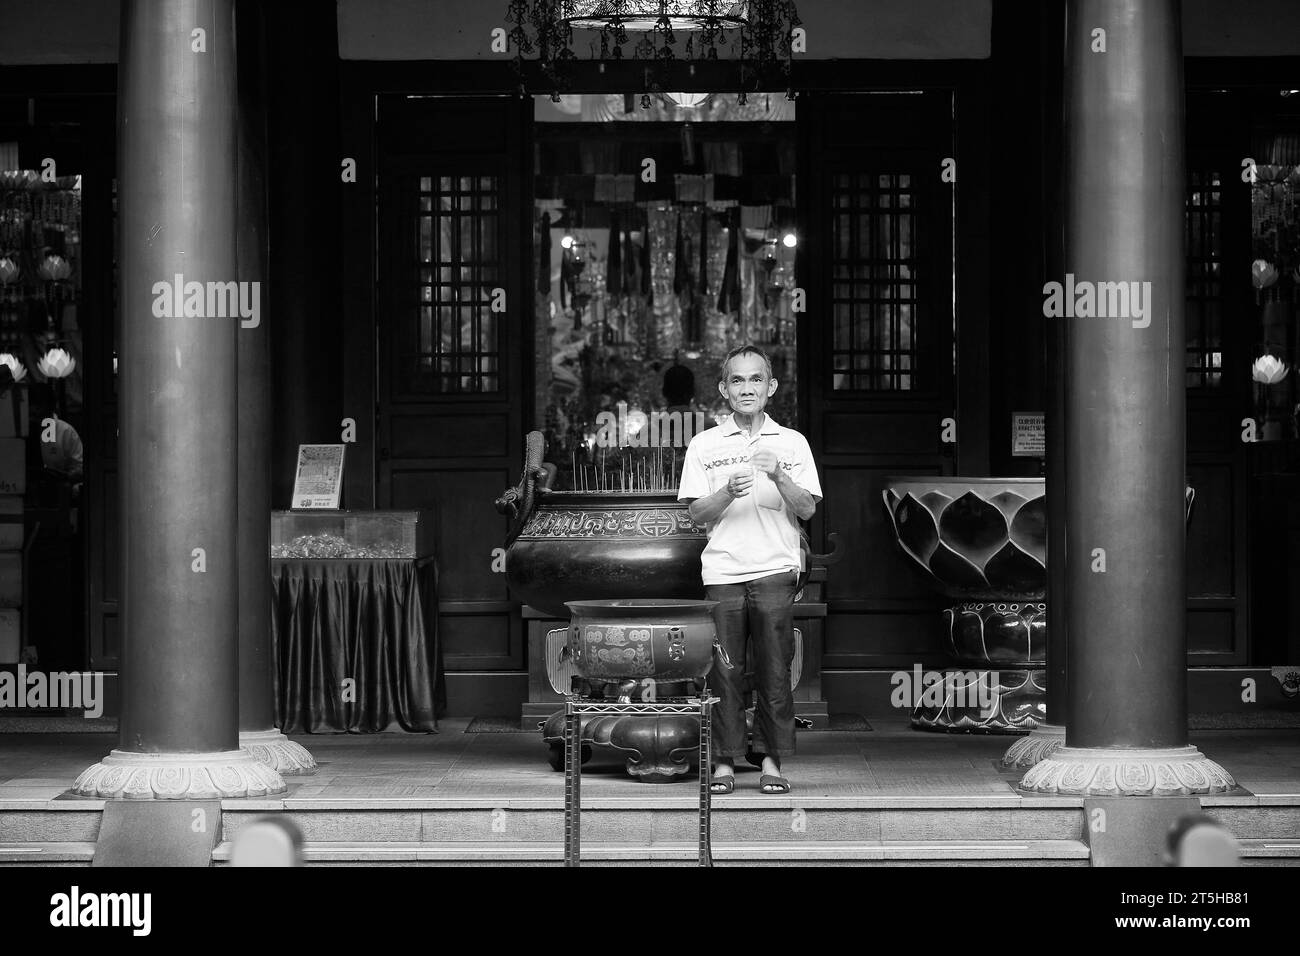 Black And White Photo Of An Asian Man Holding Incense, Standing At The Entrance To The Buddha Tooth Relic Temple, Singapore. Stock Photo